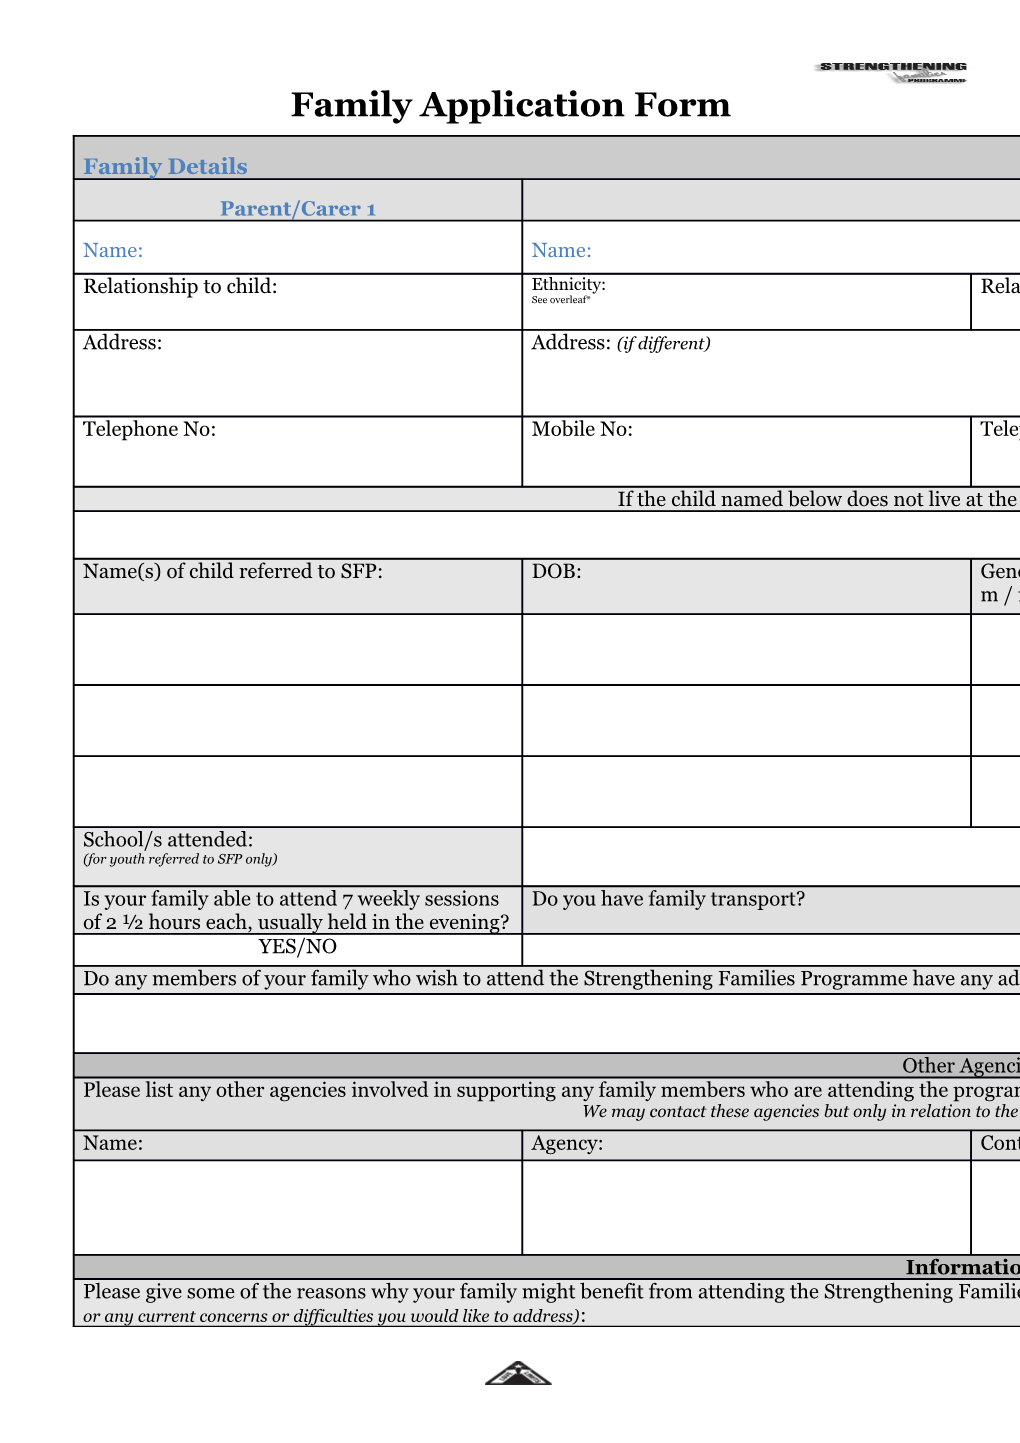 Family Application Form